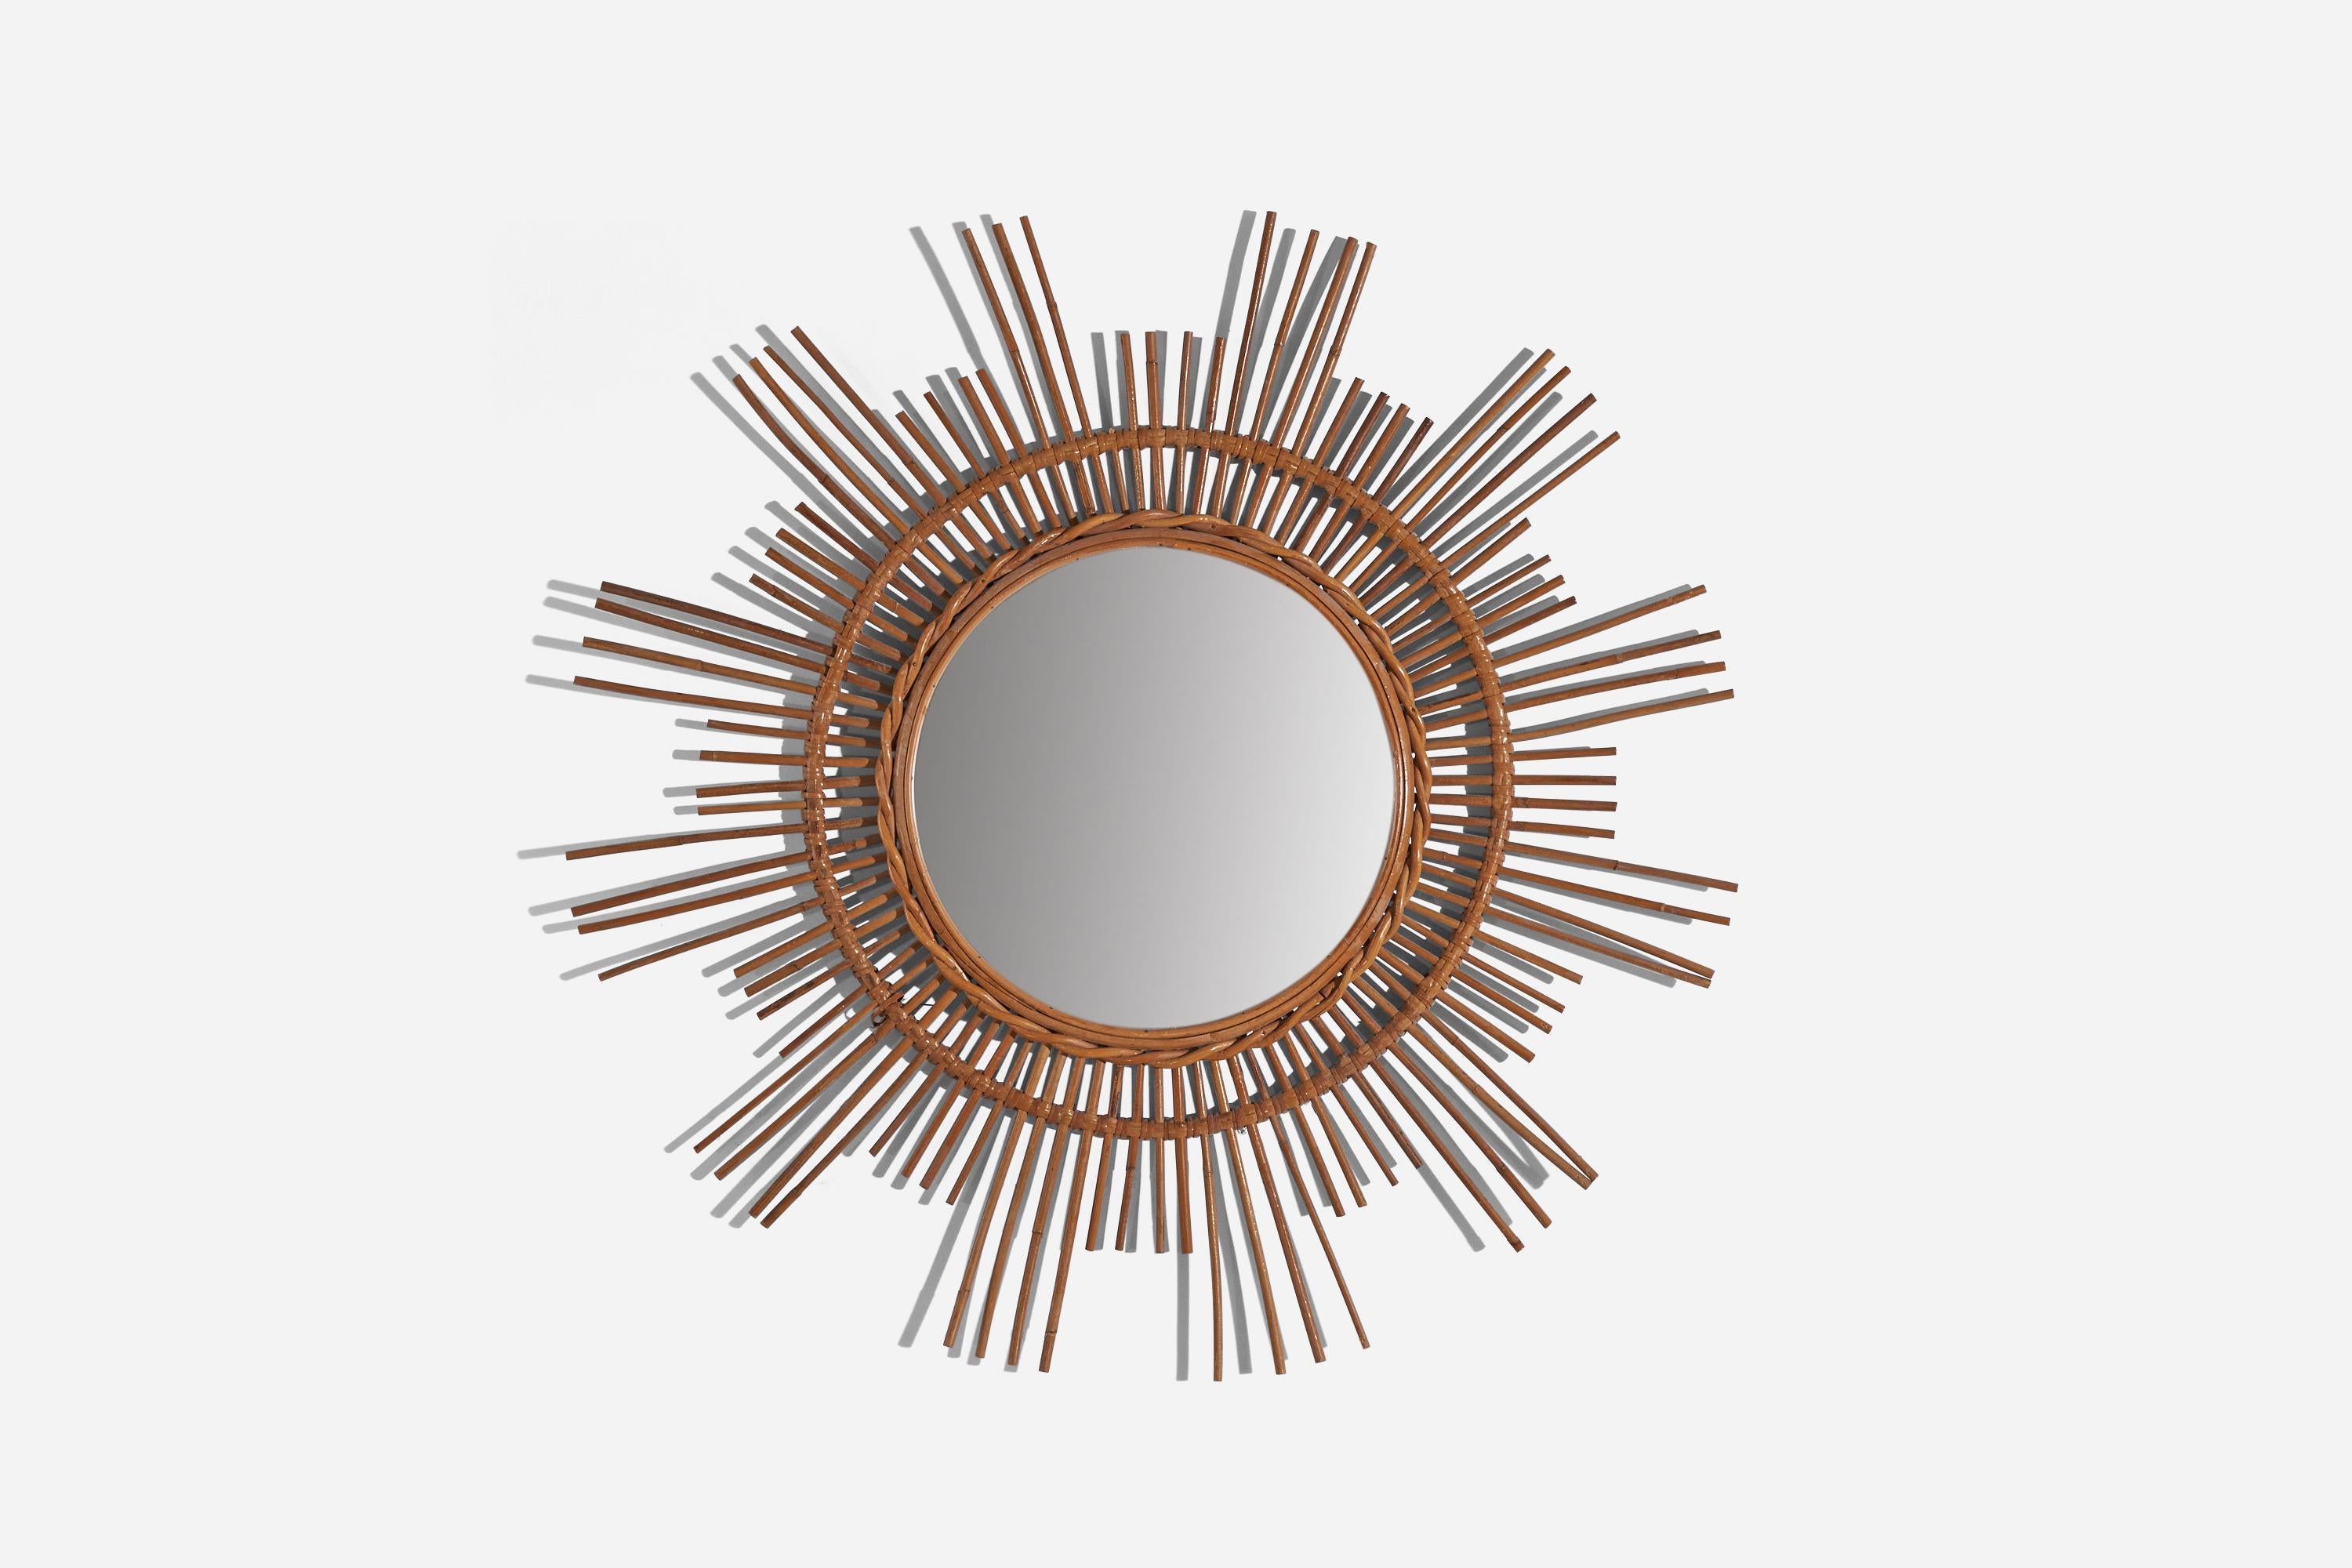 A circular, rattan wall mirror designed and produced by an Italian designer, Italy, 1950s-1960s.
    